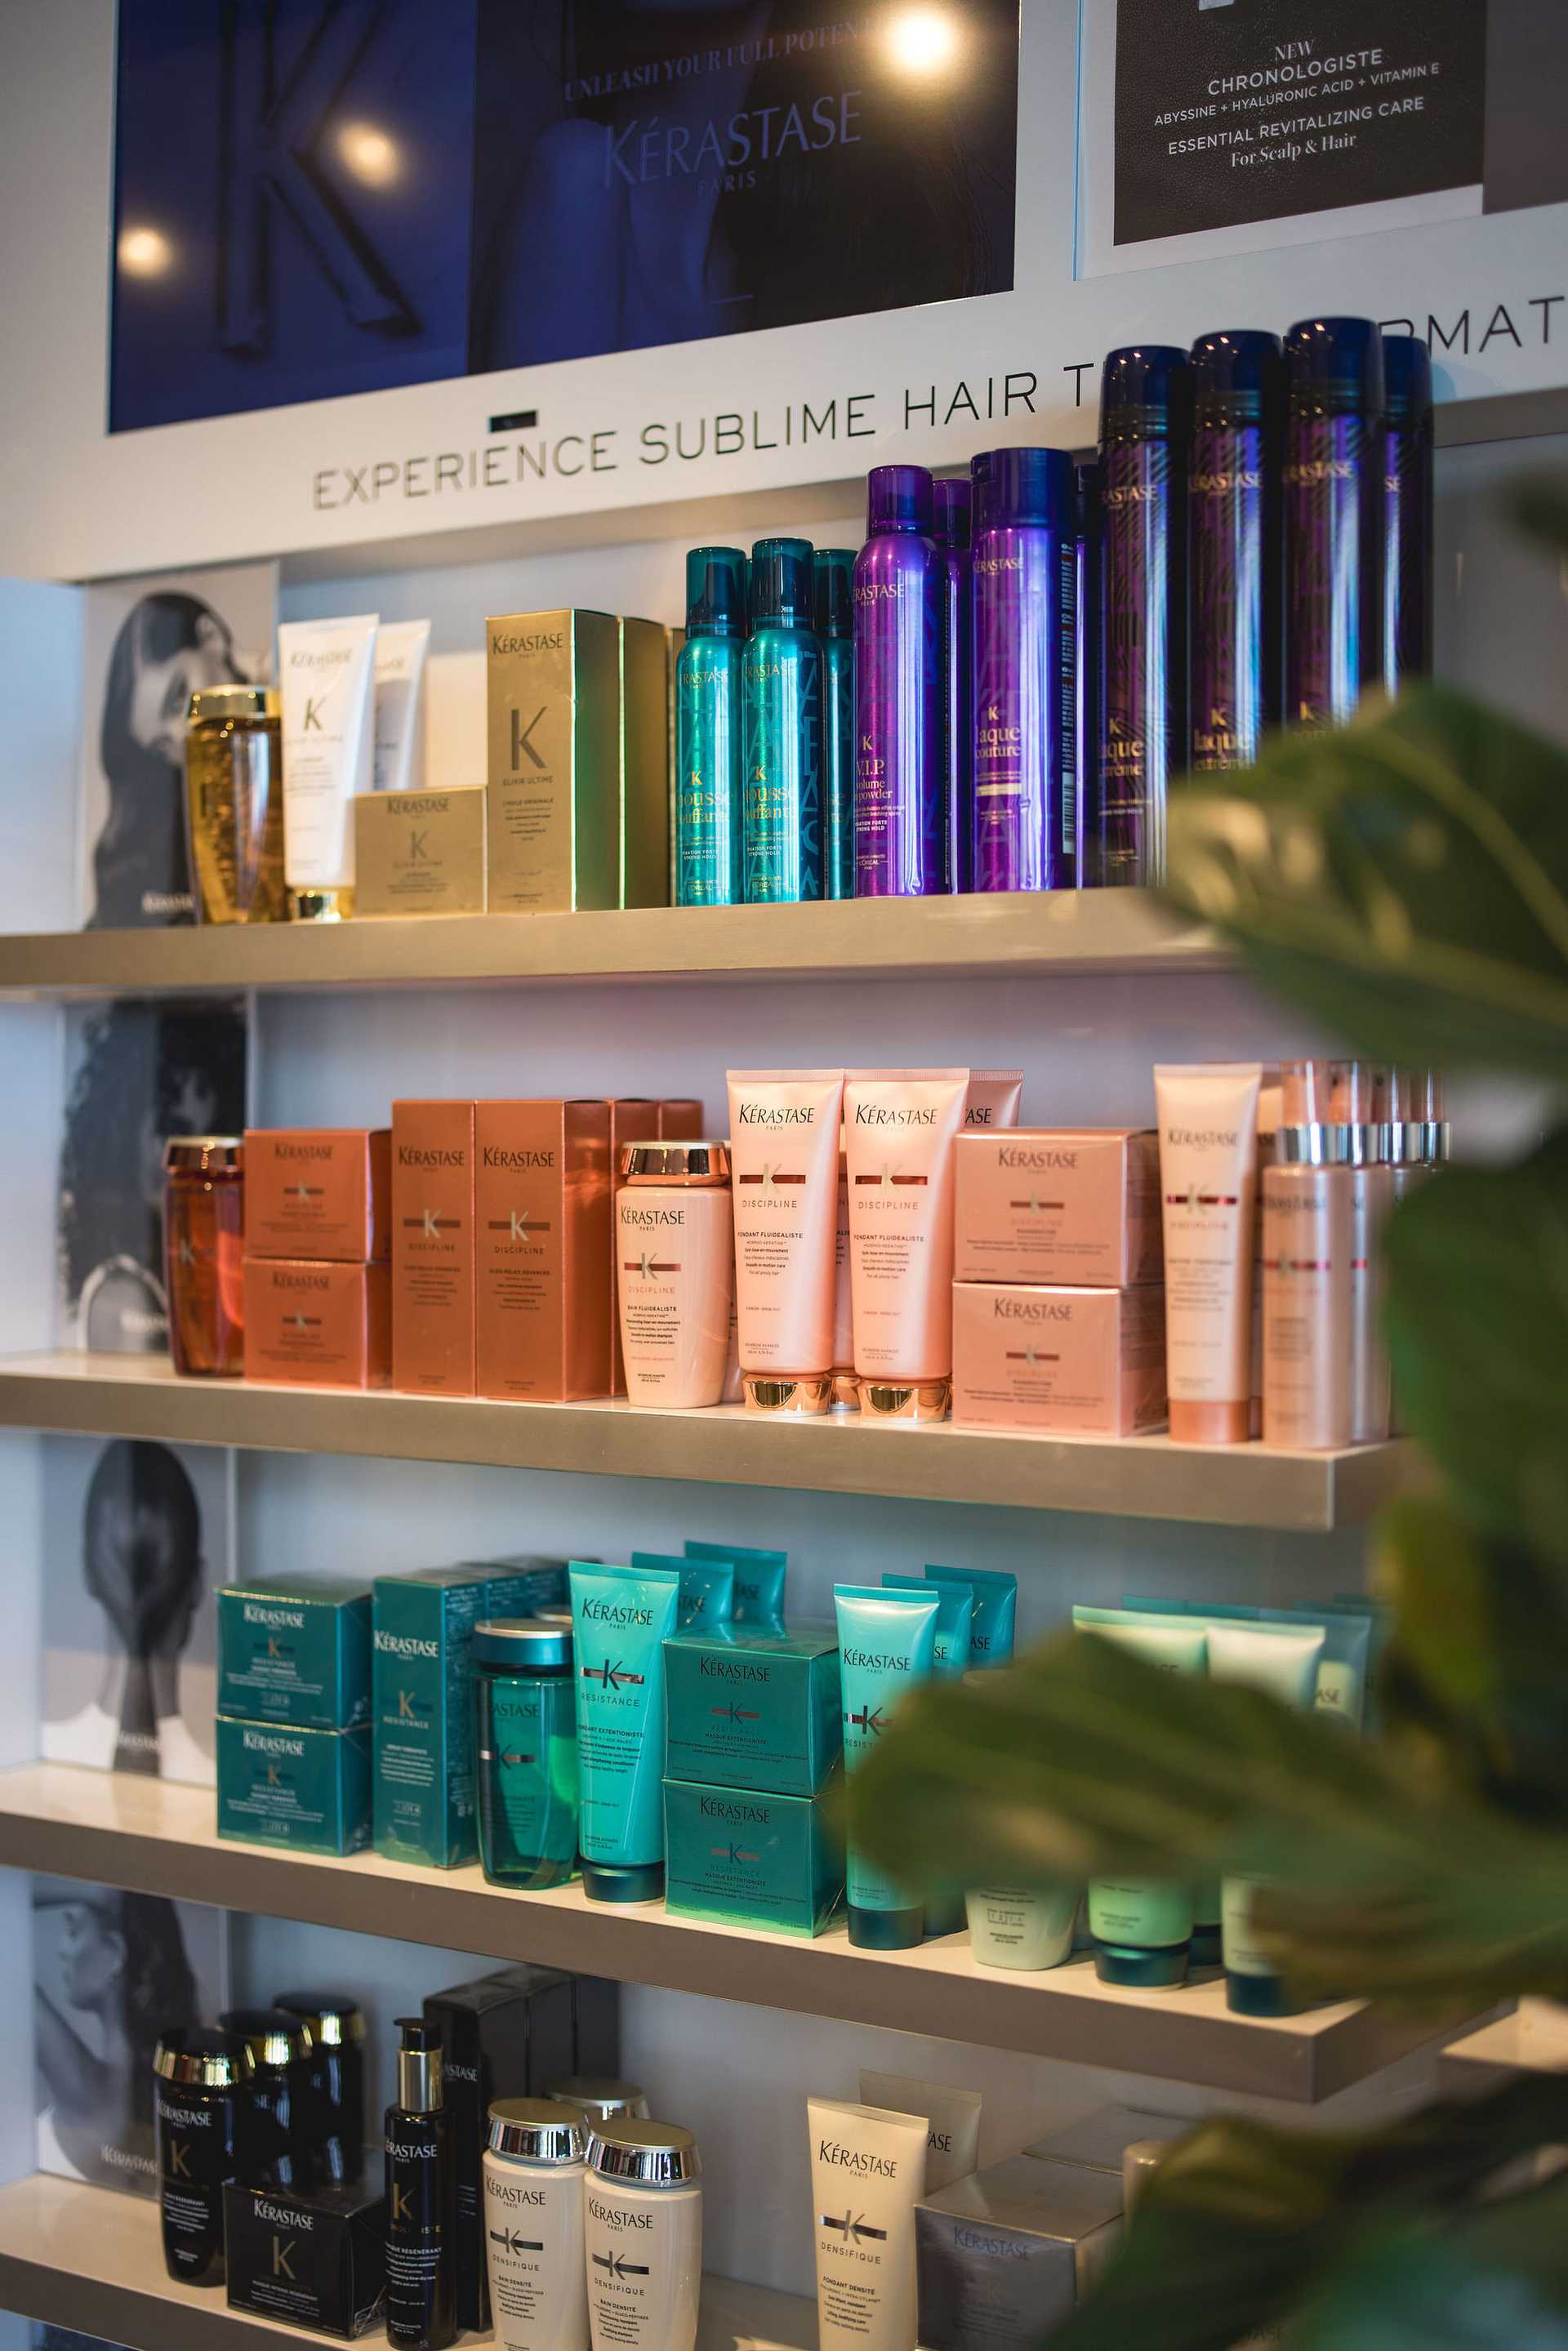 Shelves of hair care products with various colorful bottles and boxes from the brand Kérastase.